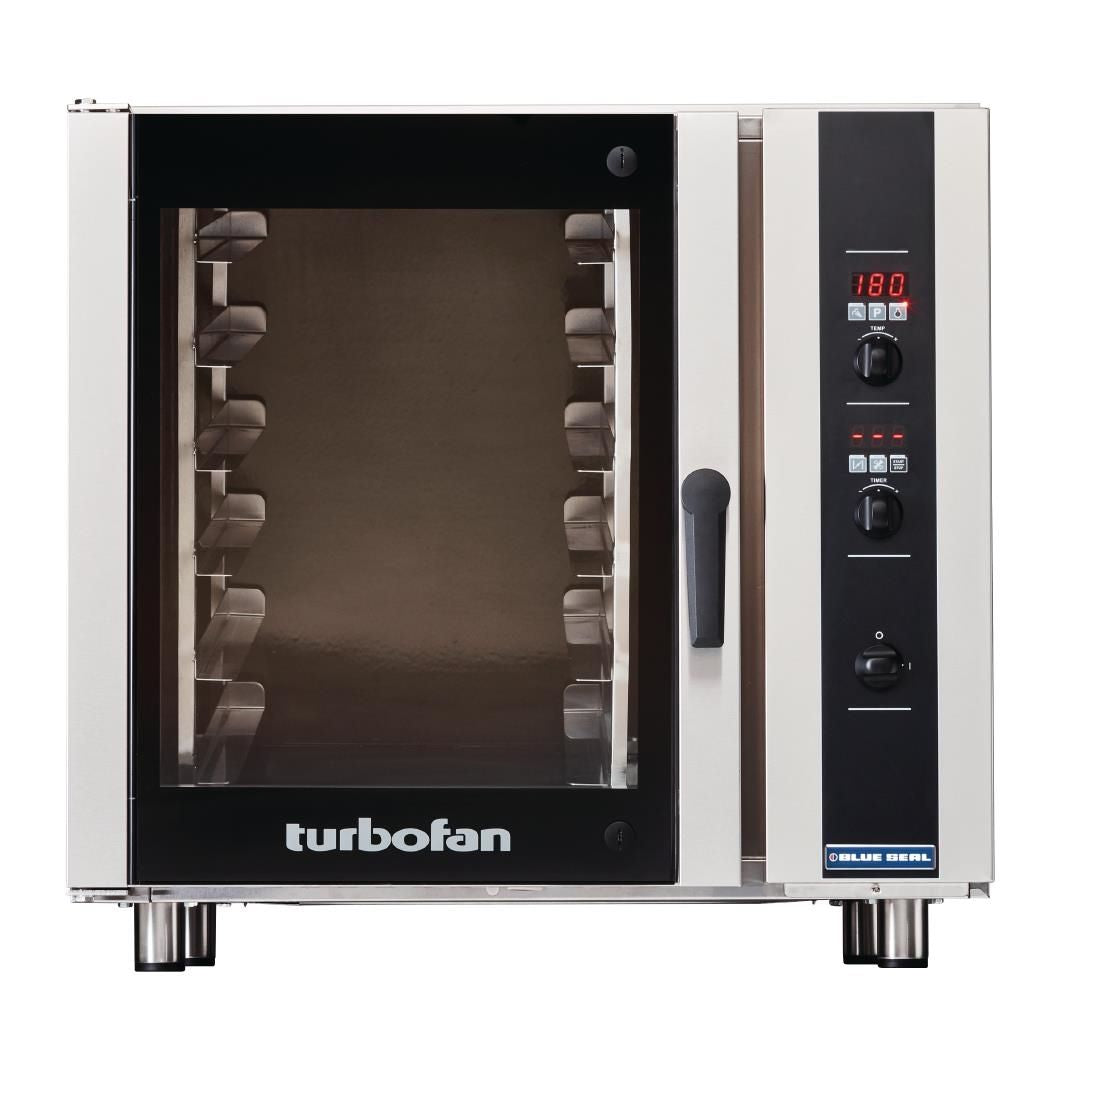 Blue Seal Turbofan Convection Oven E35D6 JD Catering Equipment Solutions Ltd